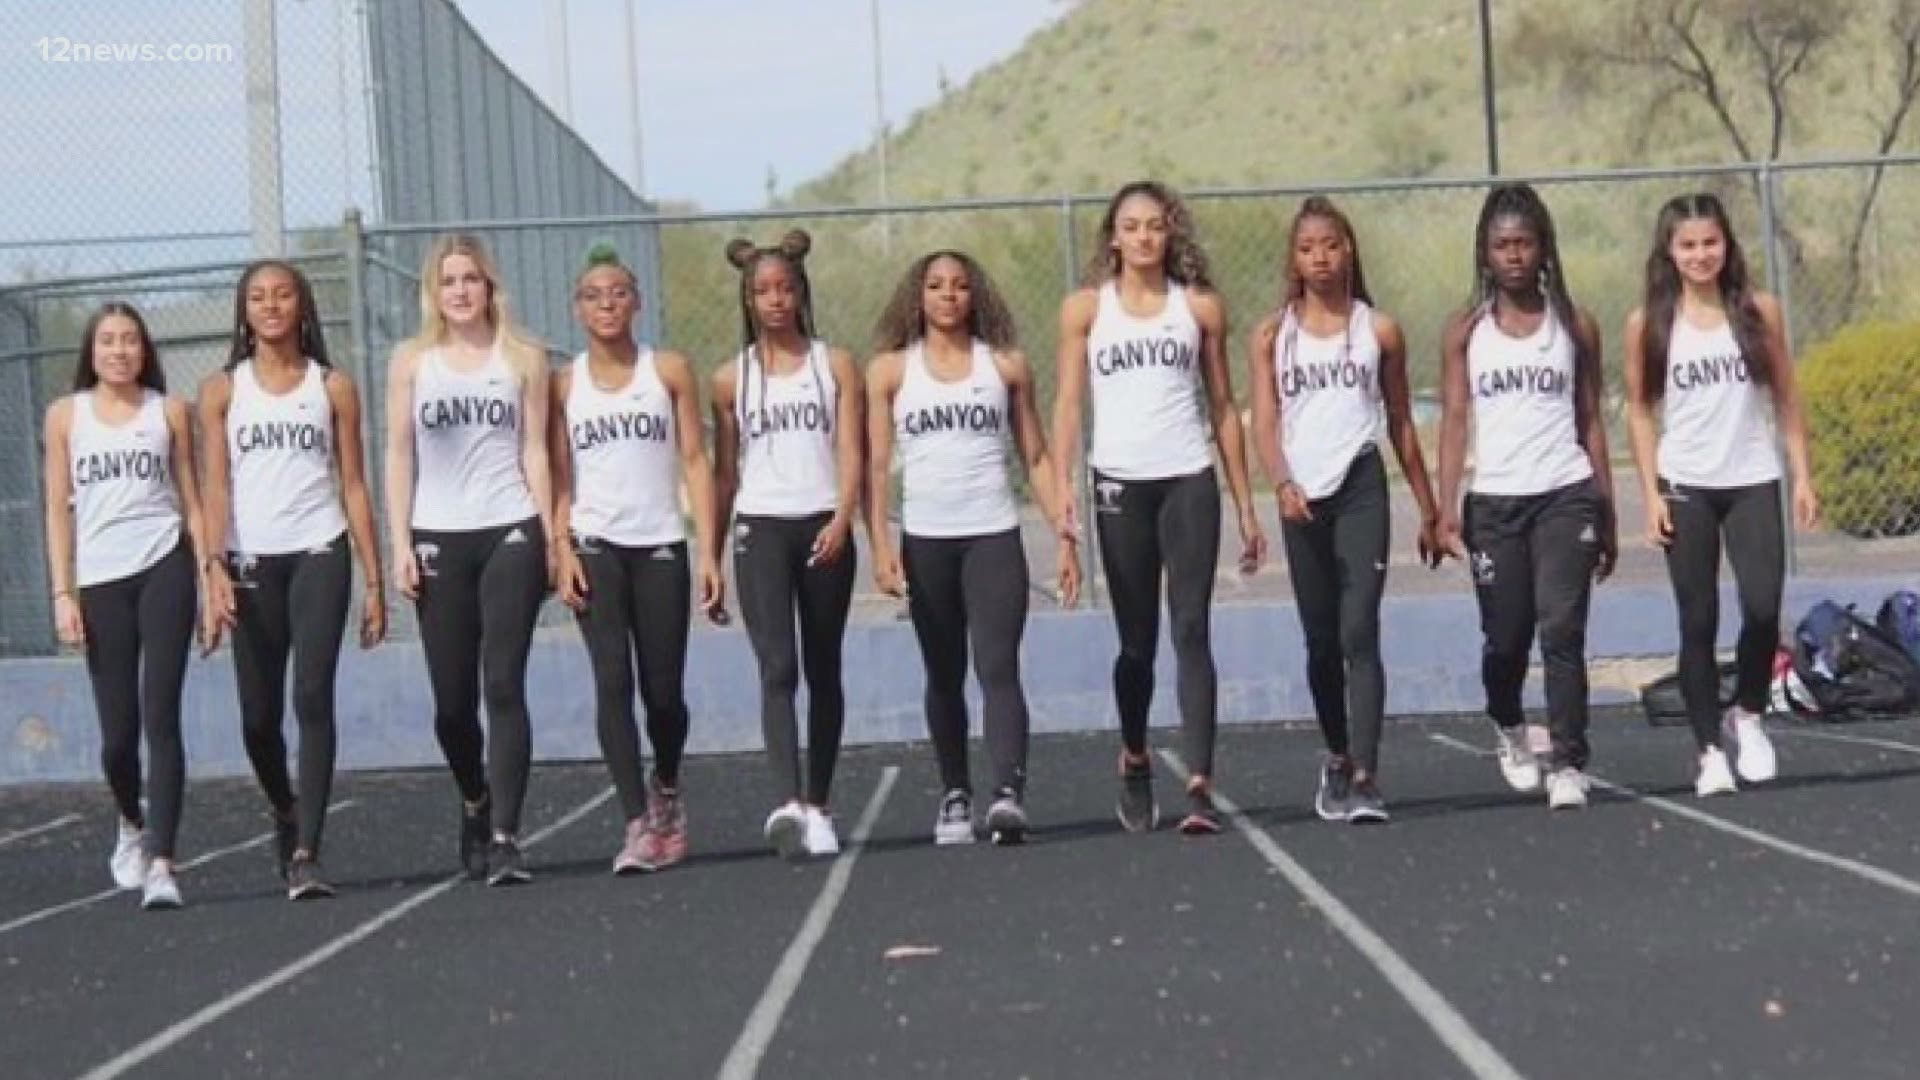 This week would've been the state track meet, an event usually dominated by the North Canyon HS girls team. As Cameron Cox found out, this year had a special meaning